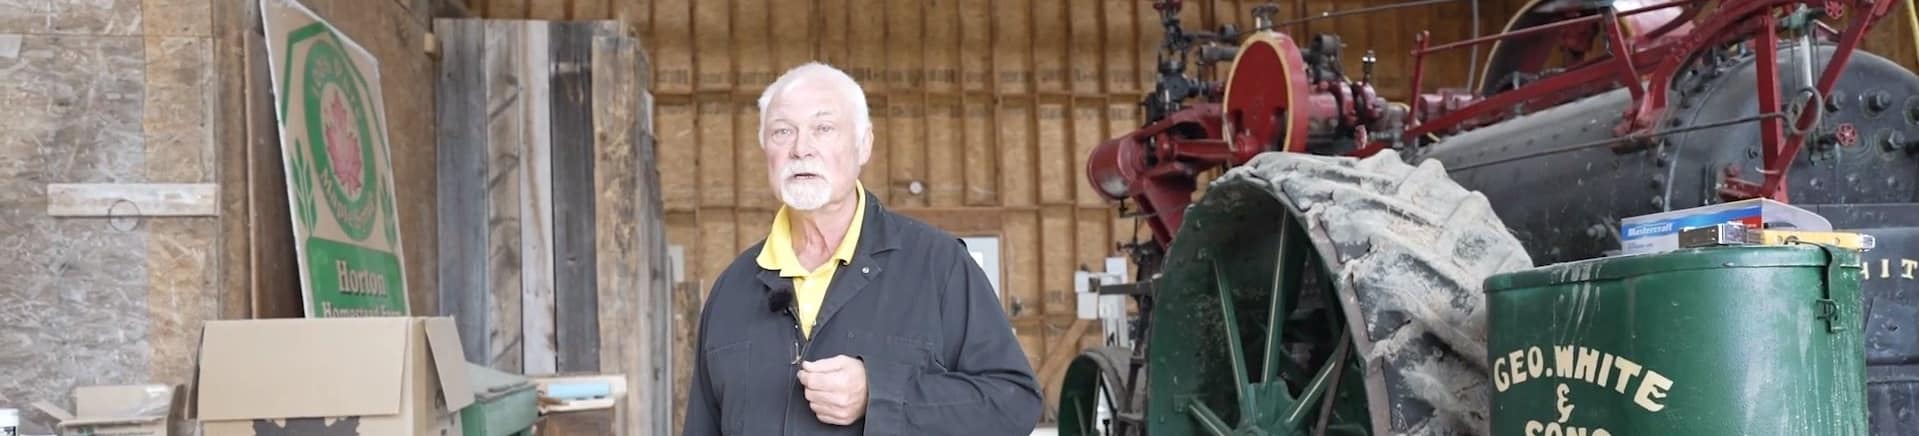 Man in Sugar Barn explaining how to make Maple Syrup